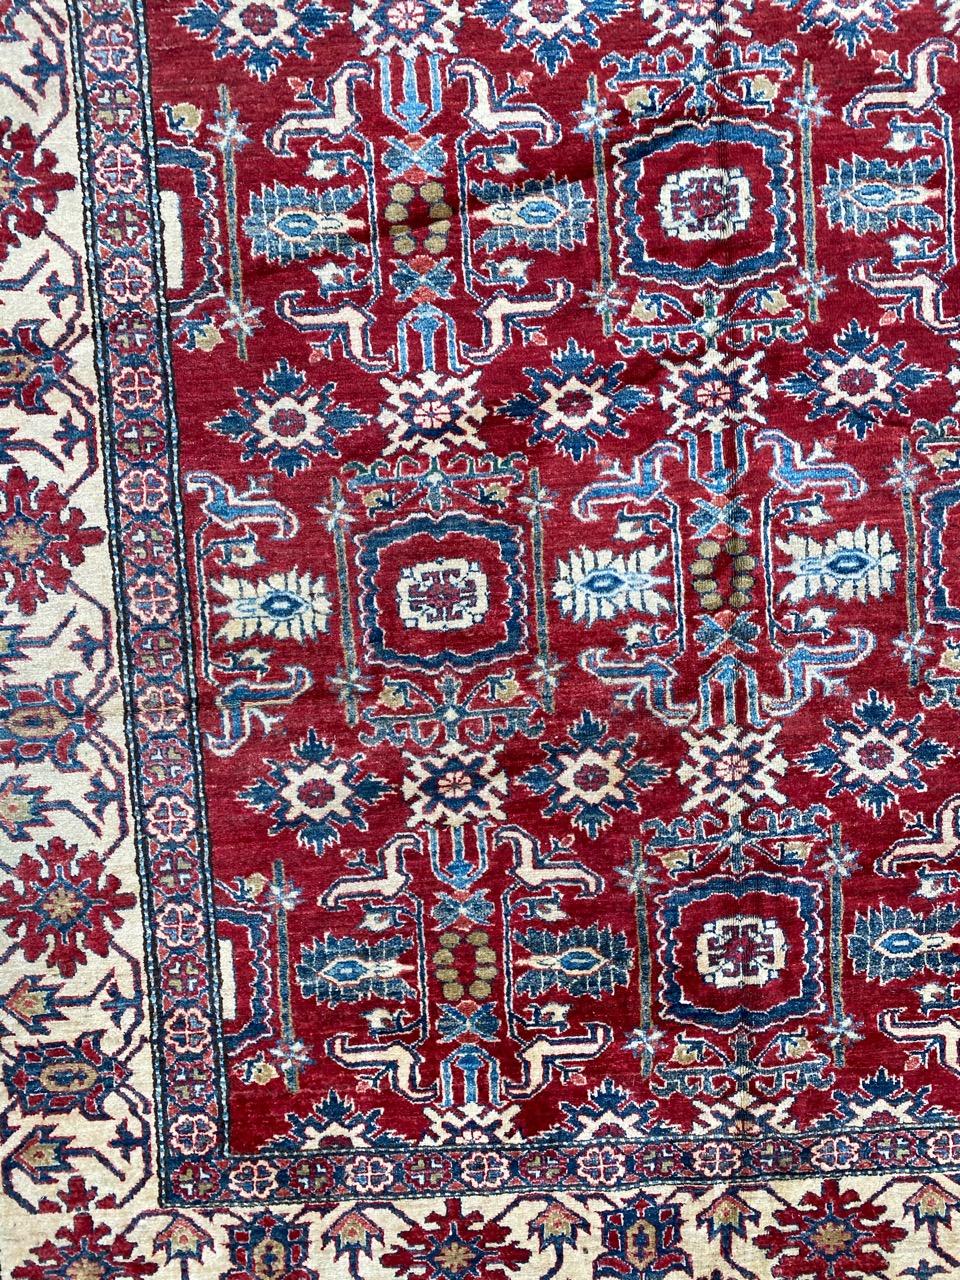 Very beautiful Persian design Afghan rug with nice stylized and decorative design and beautiful colors, entirely hand knotted with wool velvet on cotton foundation.